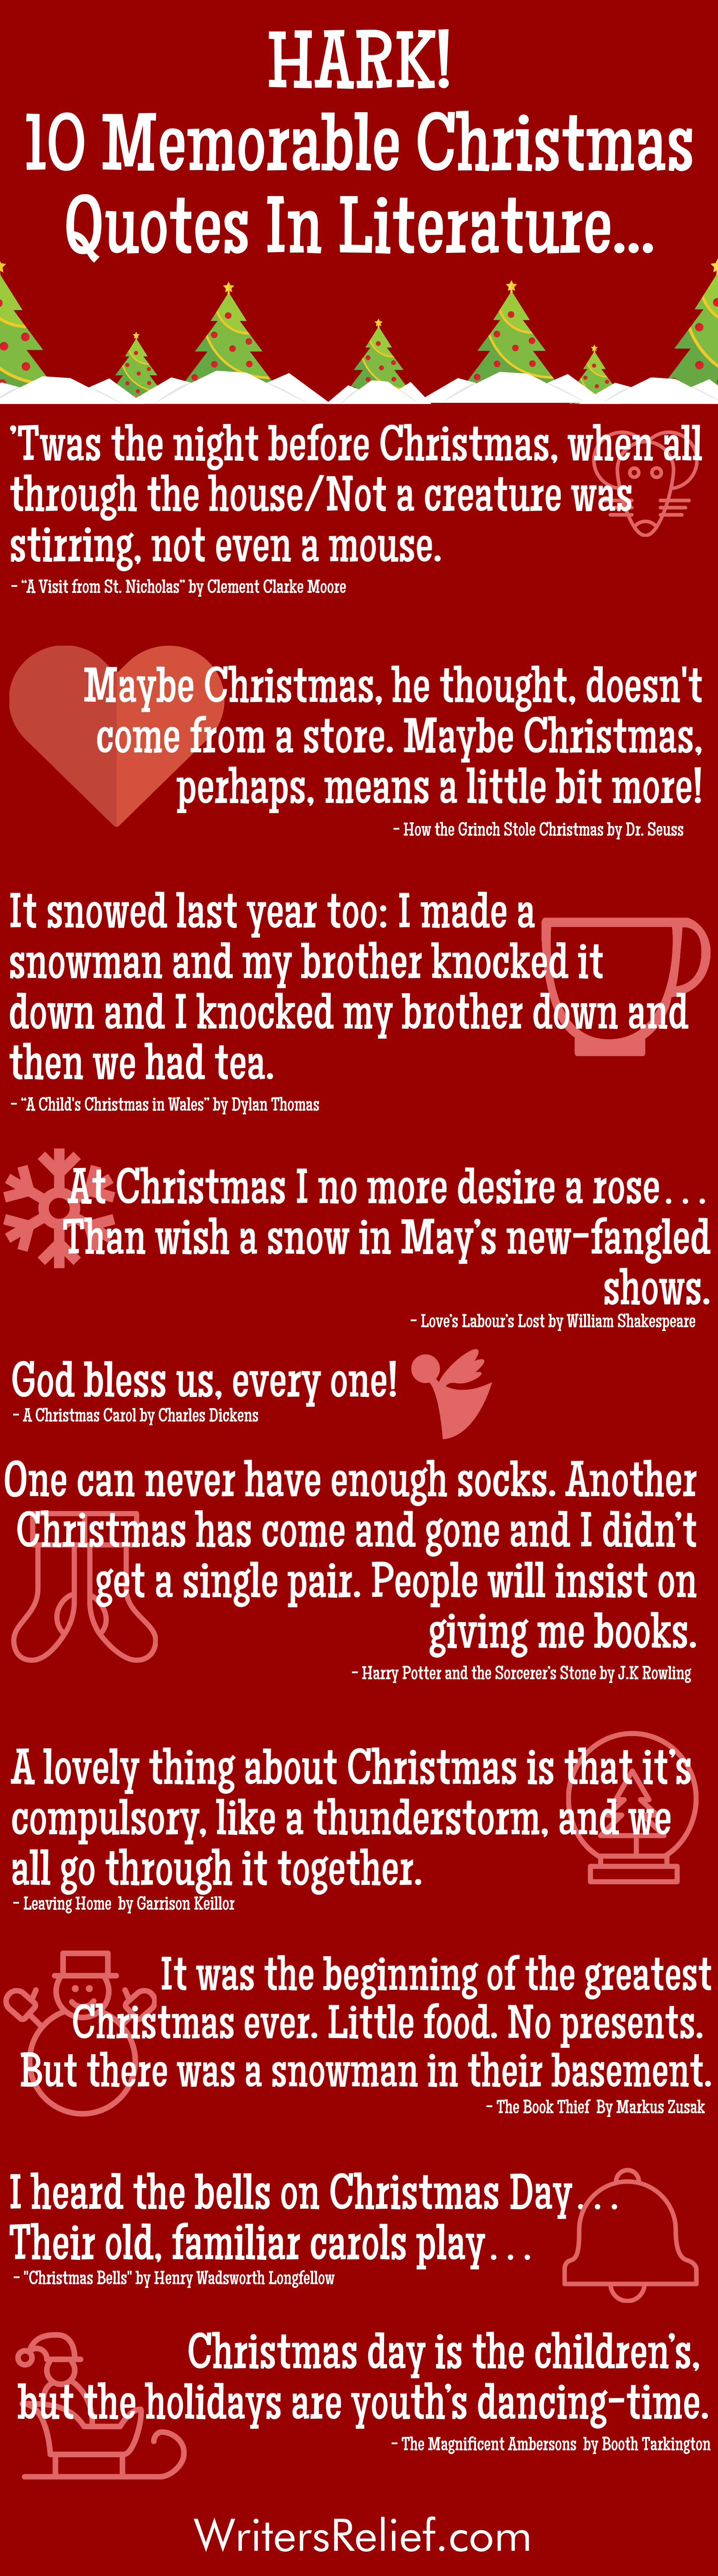 The 10 Most Memorable Literary Christmas Quotes